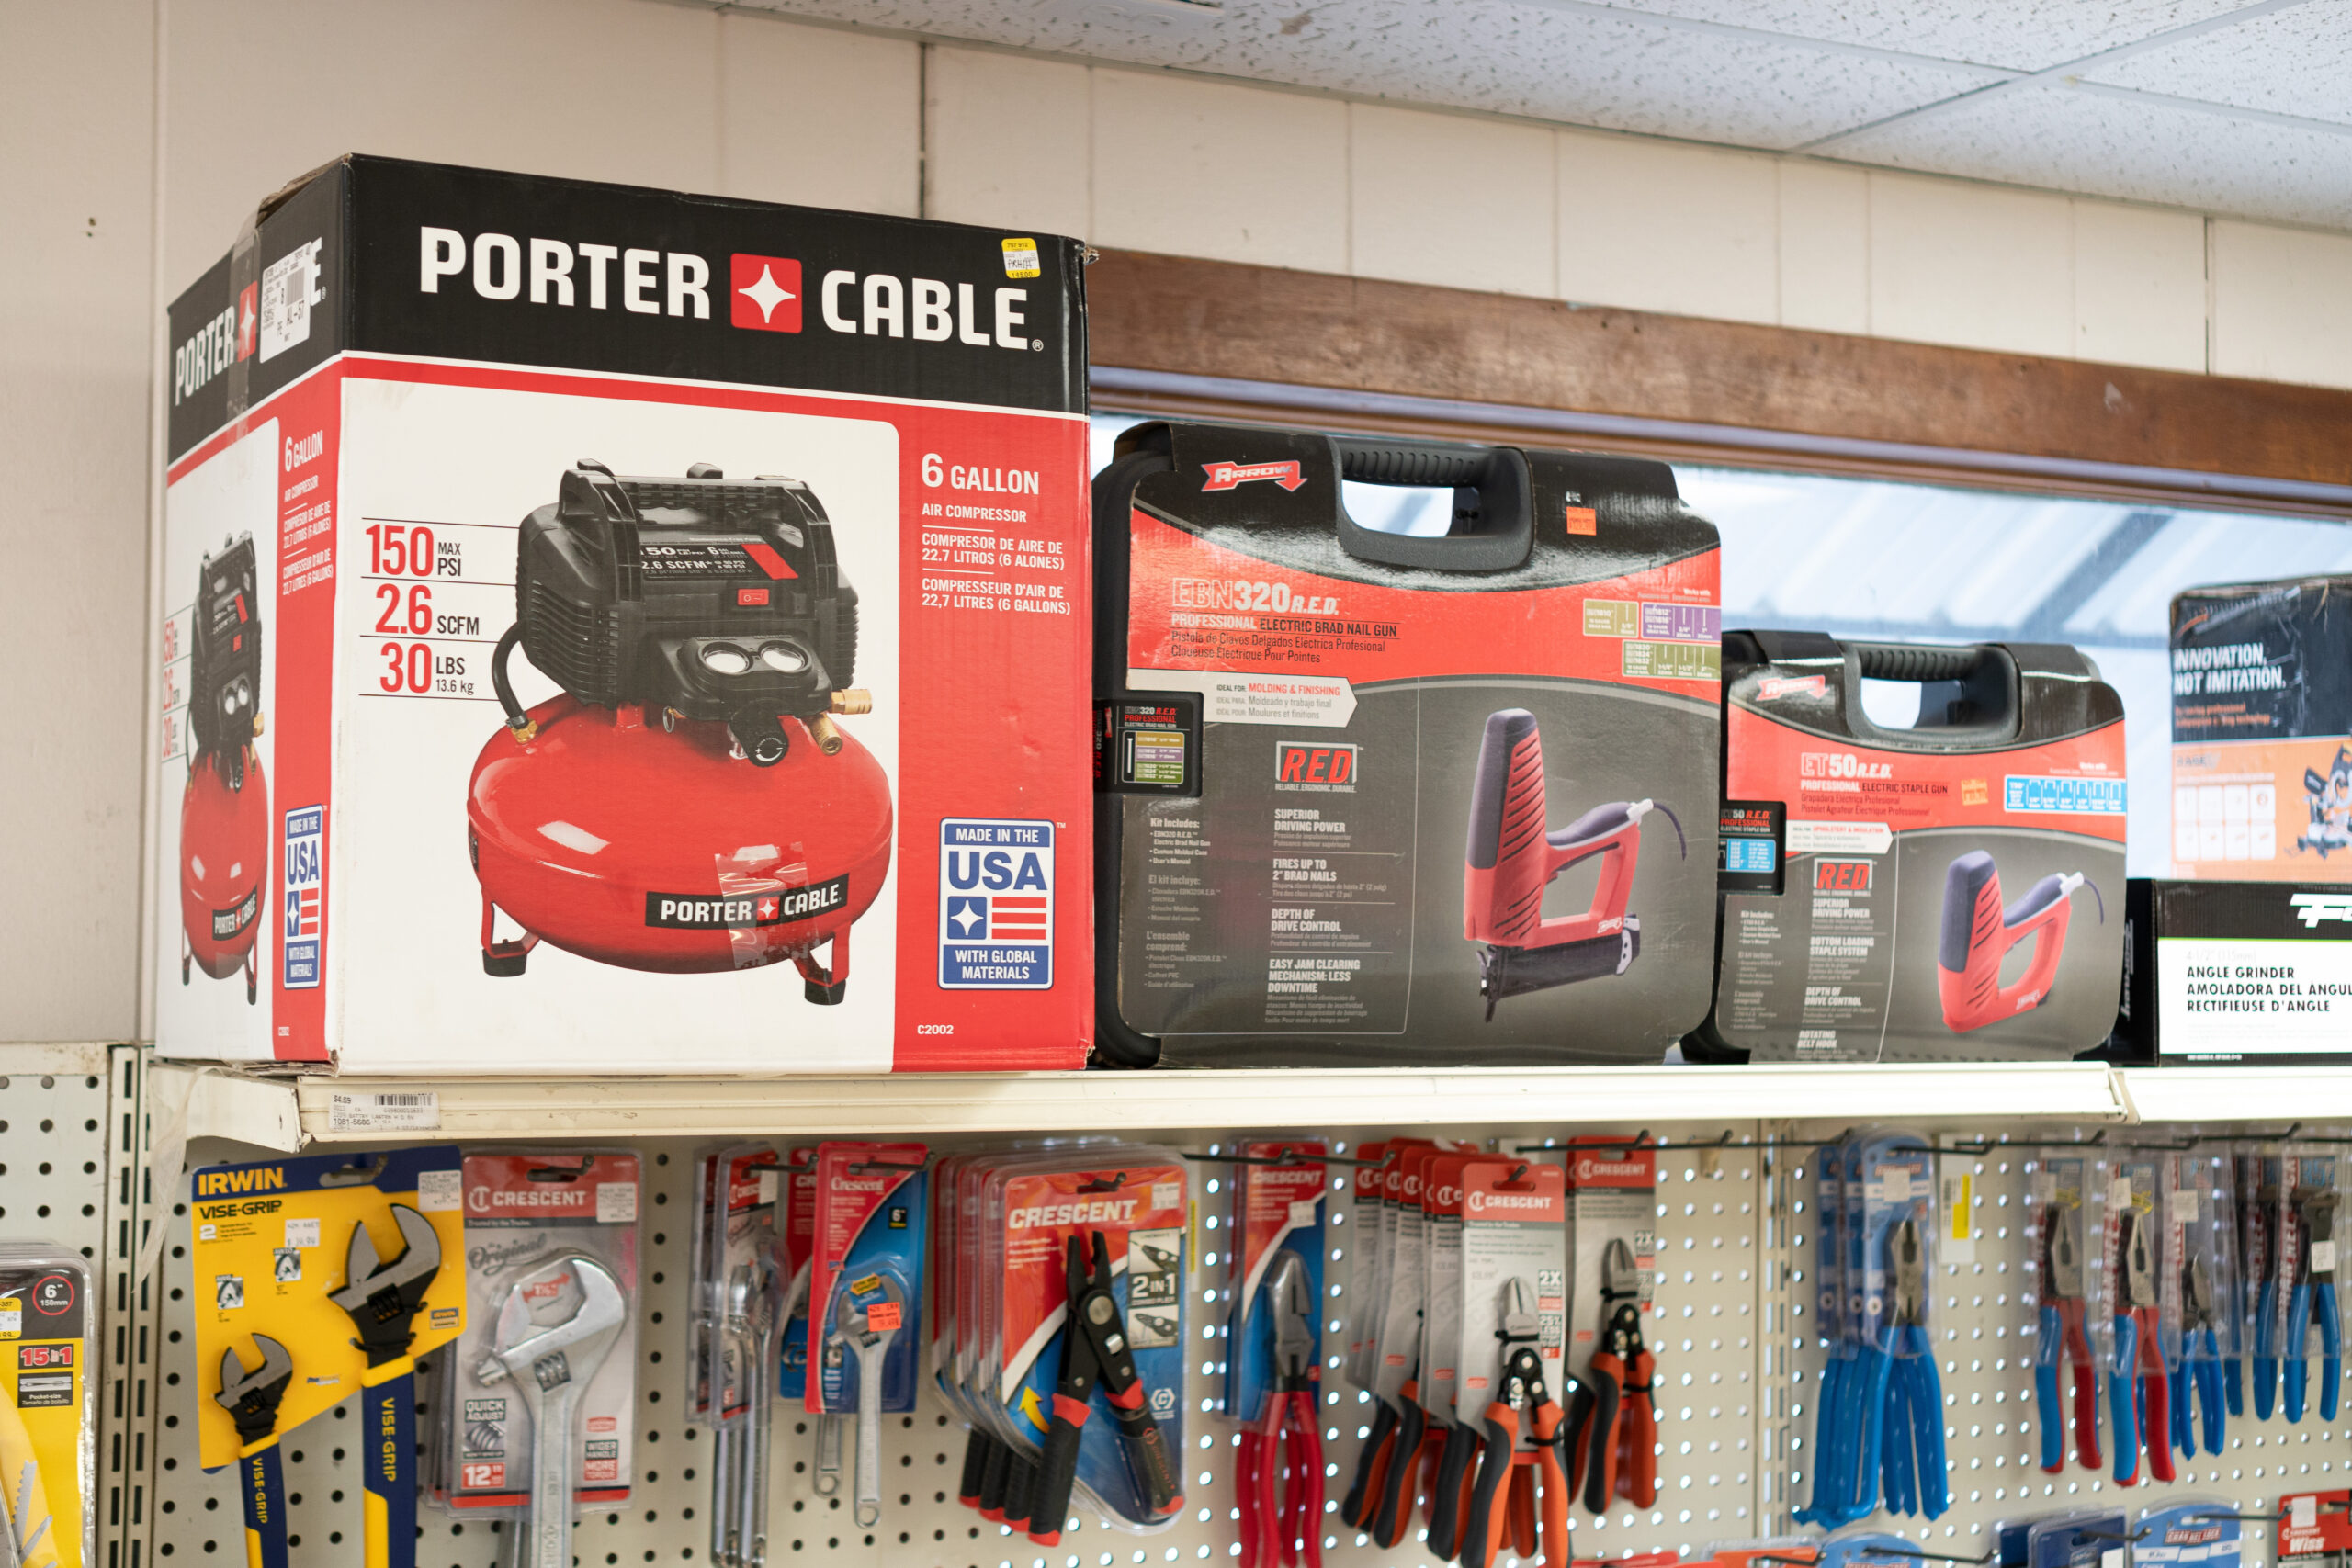 An Air Compressor and Nail Guns Sitting on a Shelf Above Wrenches & Pliers